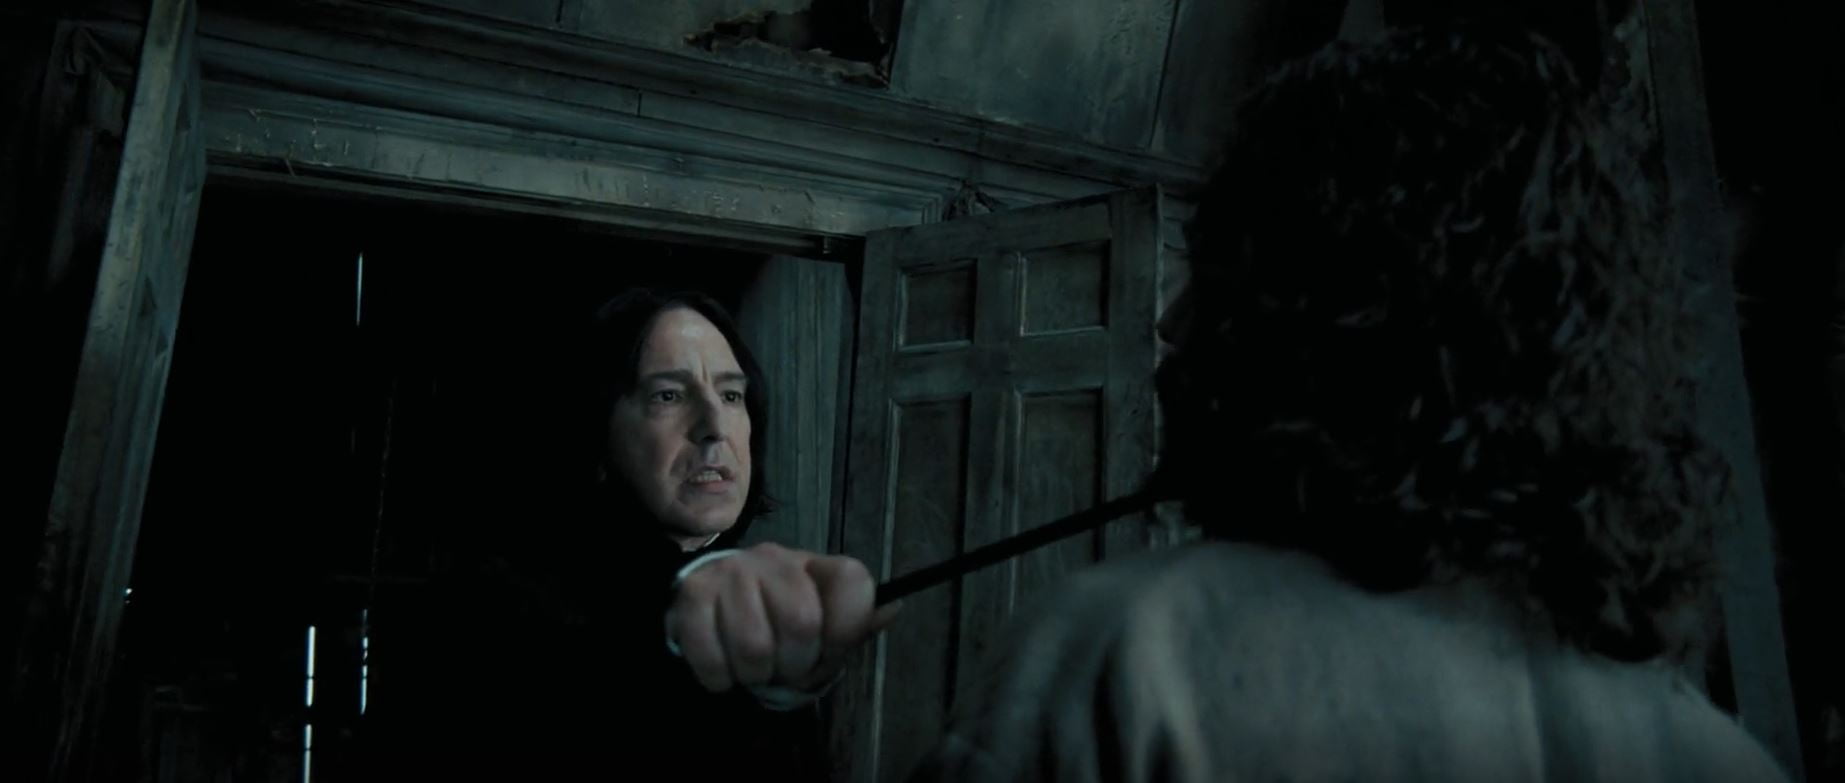 severus snape v. the ministry of magic a lawyer's take on whether dumbledore lives or will yet live